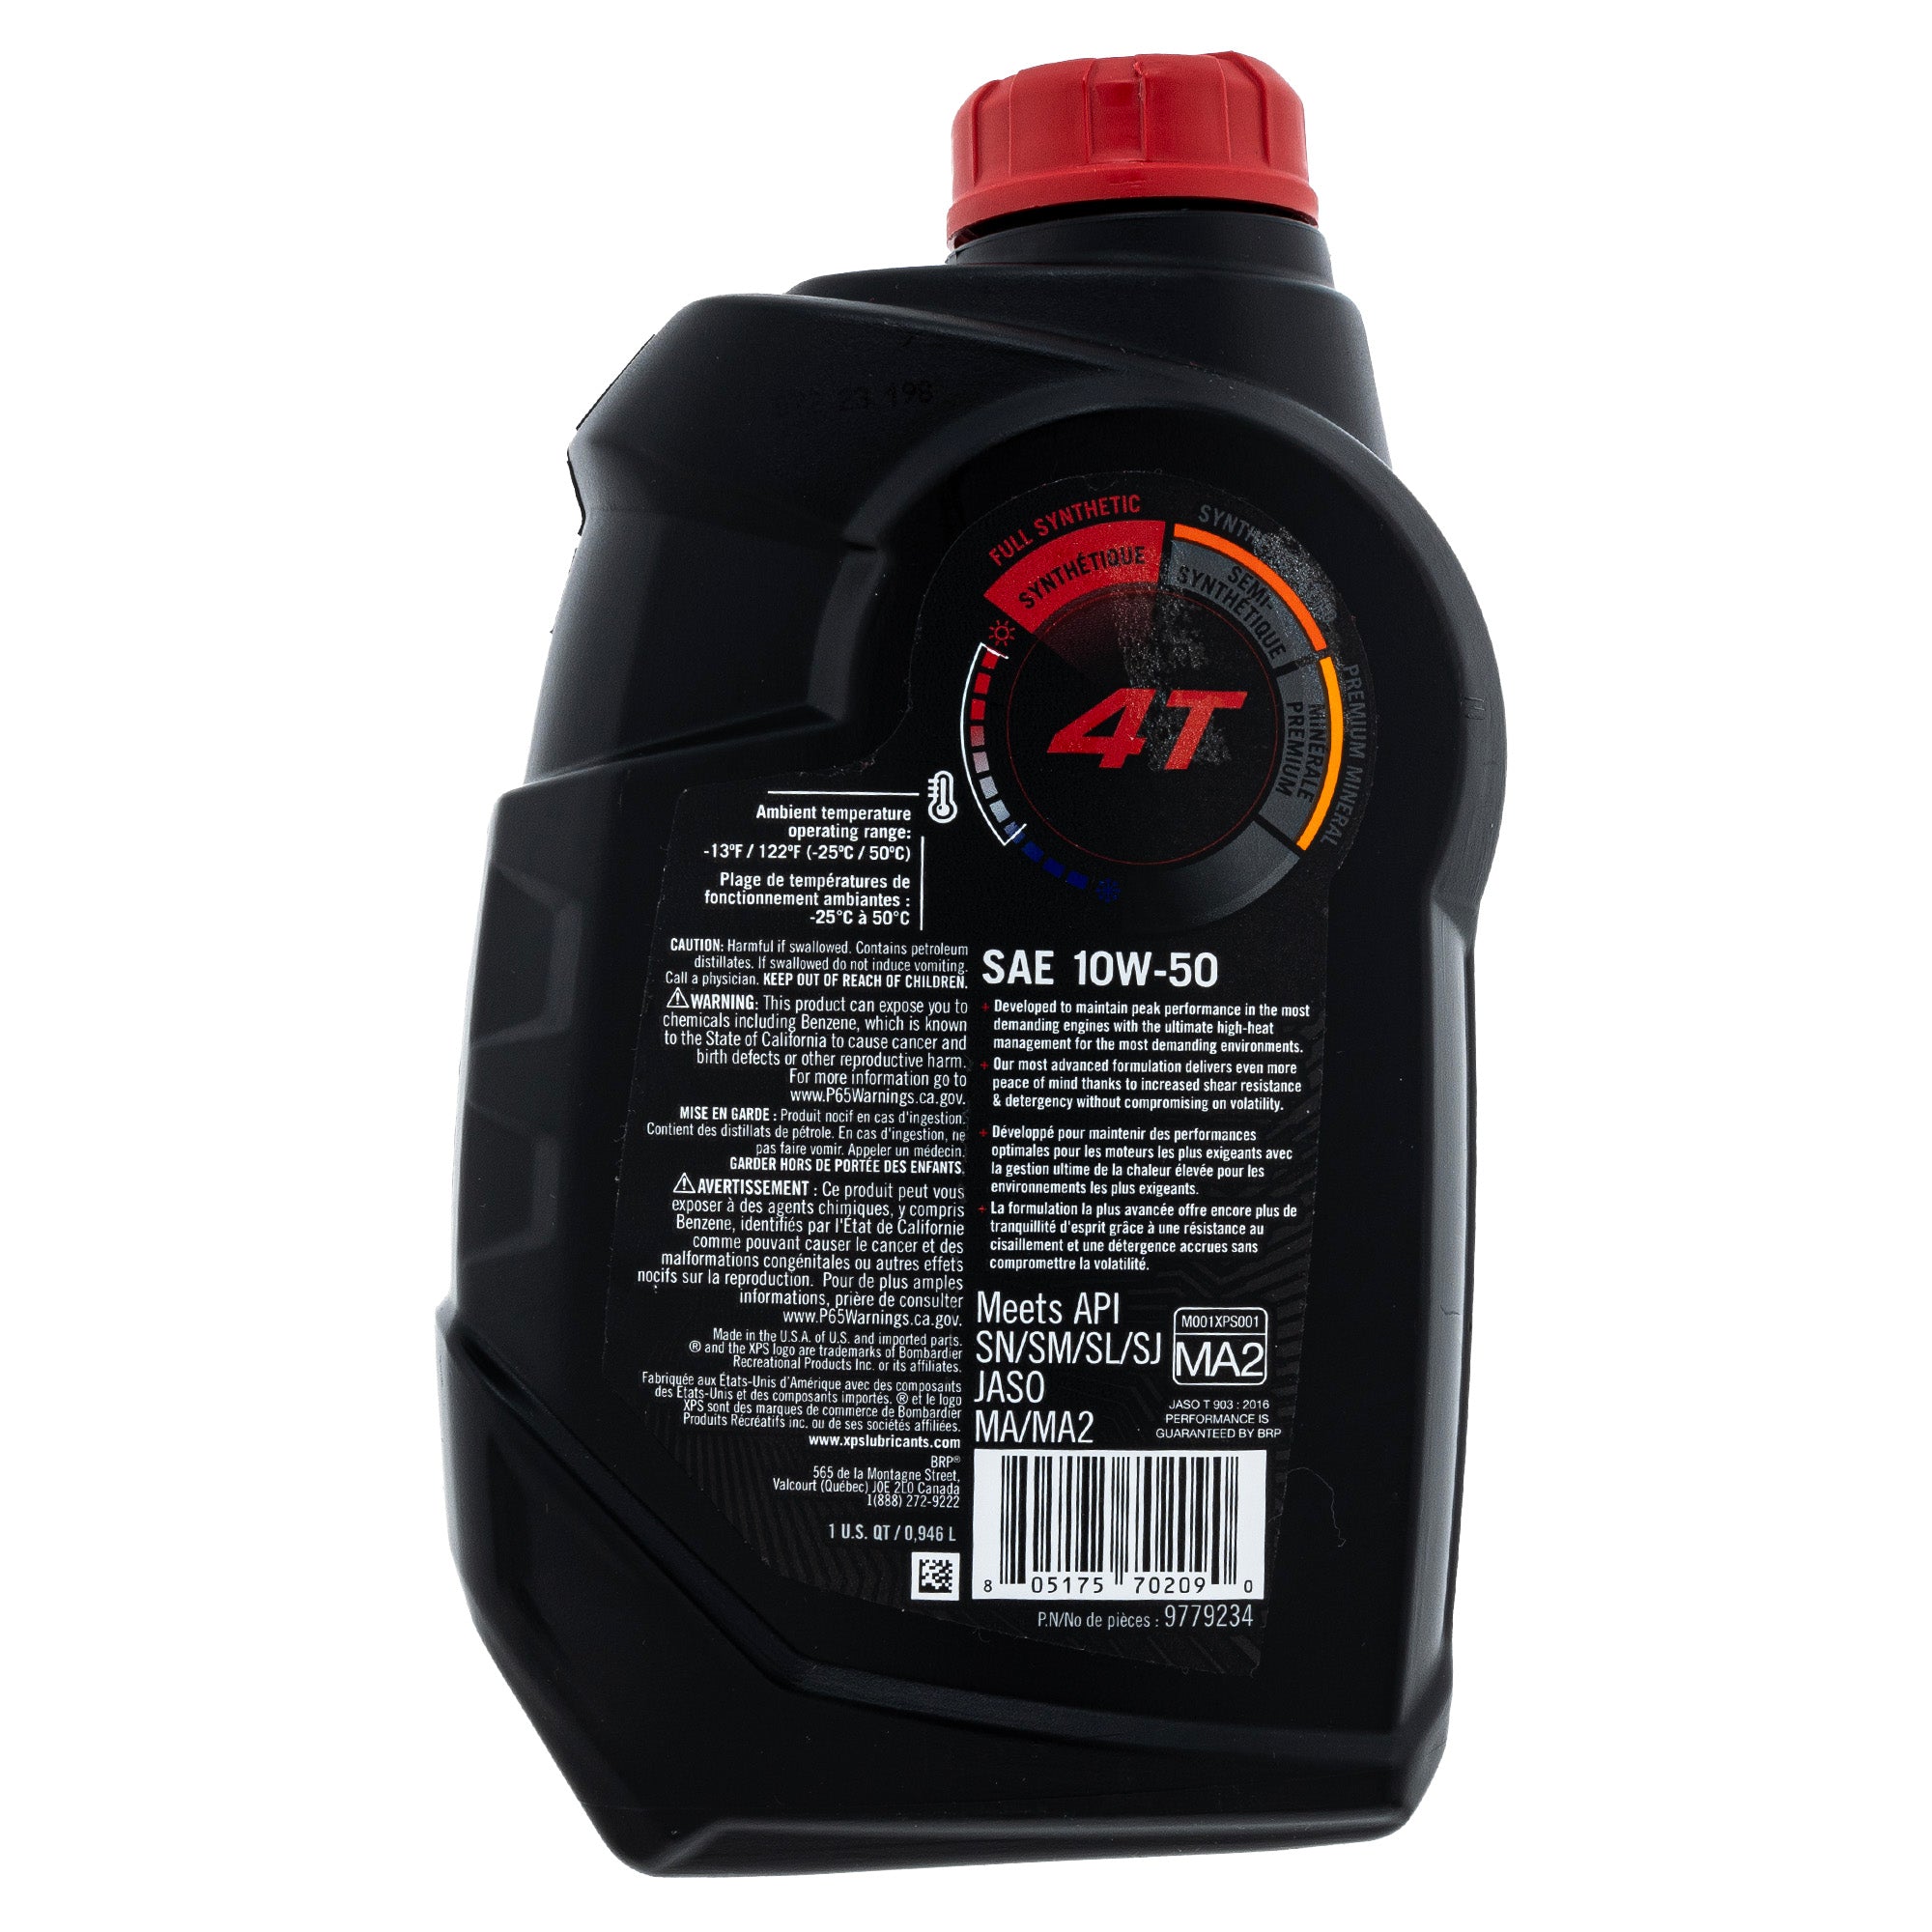 Can-Am 9779234 BRP  XPS 4T 10W50 Synthetic 4-Stroke Engine Oil 1 Quart Ski-Doo